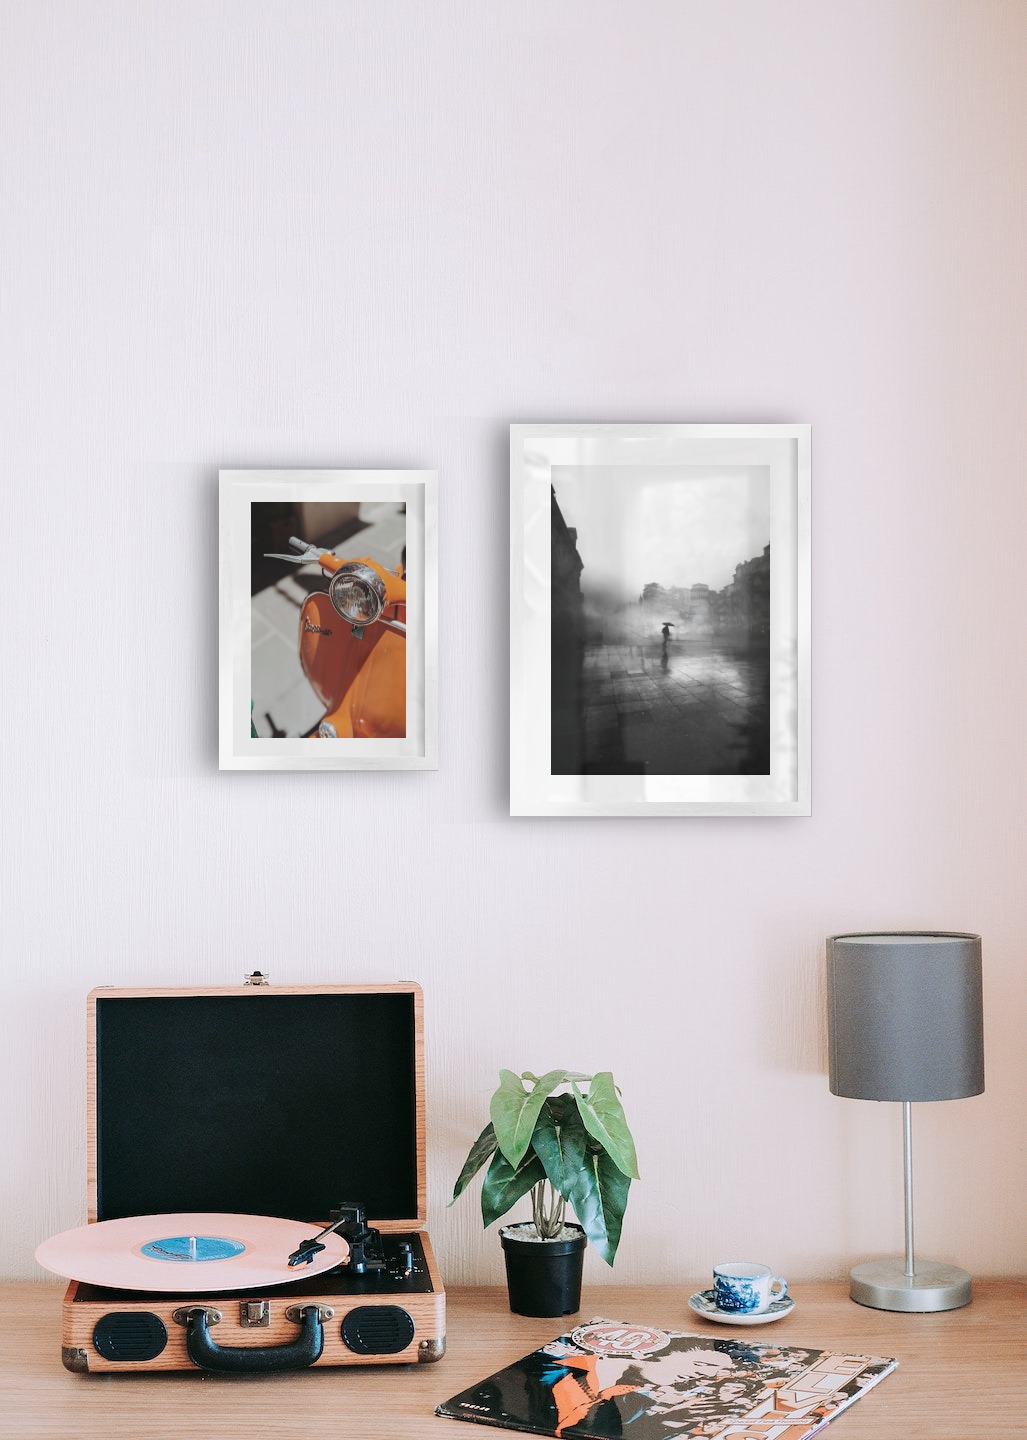 Gallery wall with picture frames in silver in sizes 21x30 and 30x40 with prints "Orange vespa" and "Rainy city"